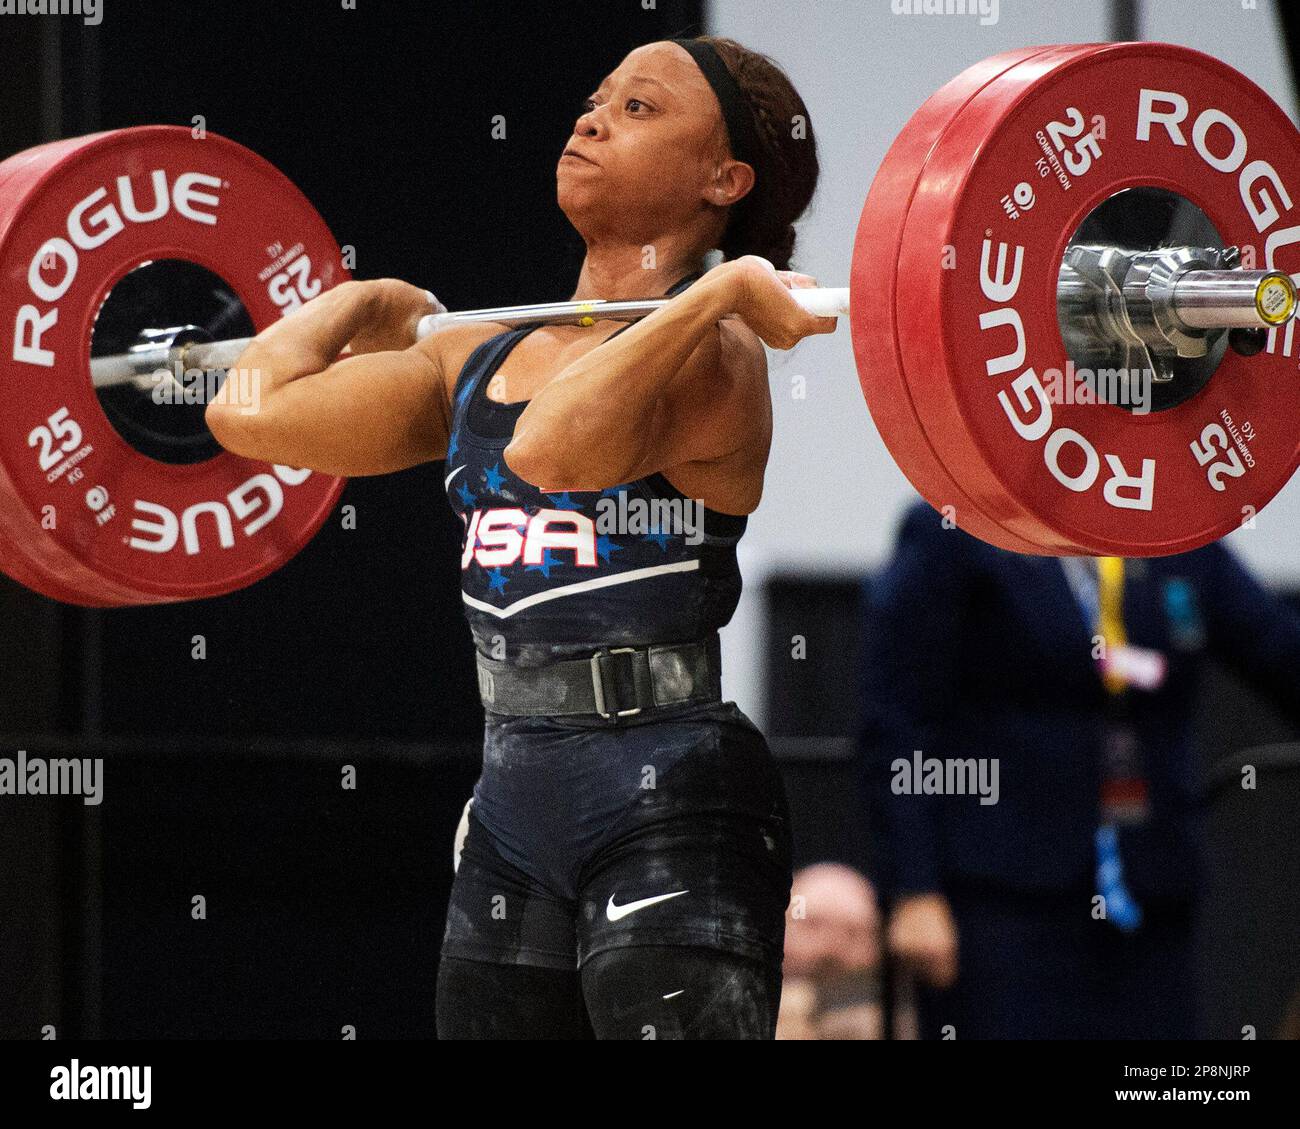 Columbus, Ohio, United States. 3th Mar, 2023. Shayla Moore competes in the clean and jerk in the Women's 59kg category at the Rogue Stage in Columbus, Ohio, USA. Credit: Brent Clark/Alamy Live News Stock Photo